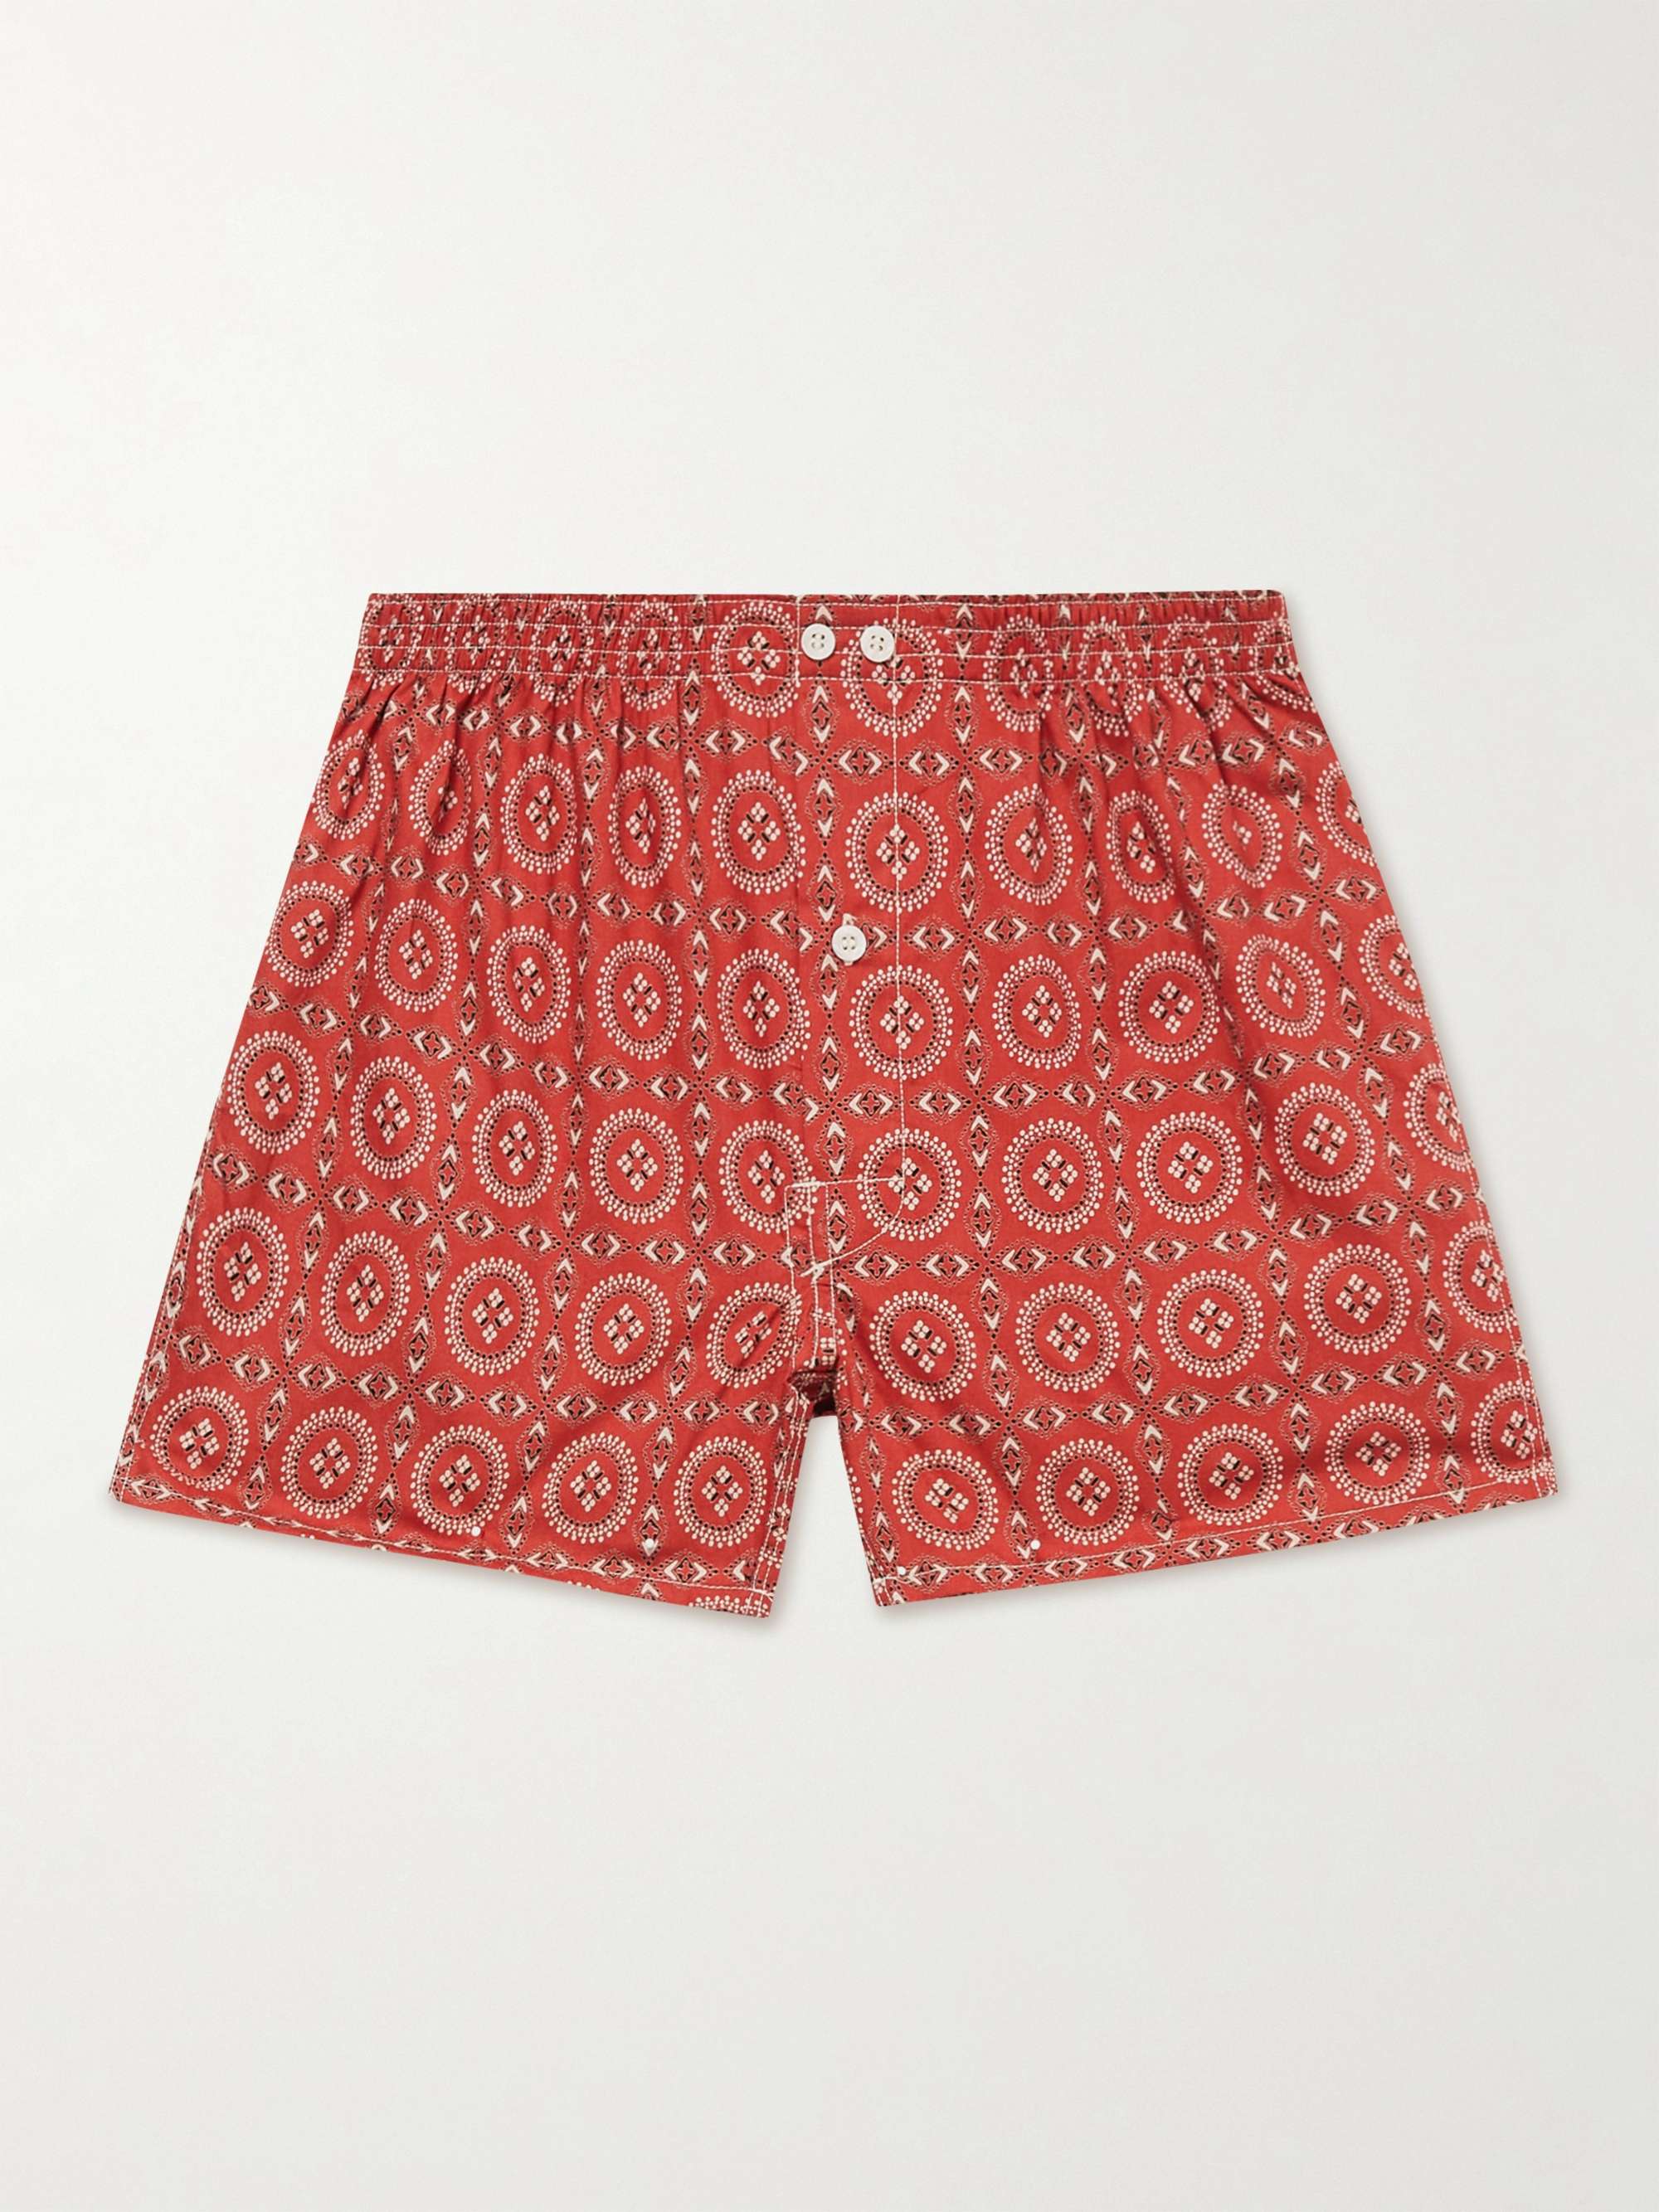 ANONYMOUS ISM Printed Cotton Boxer Shorts